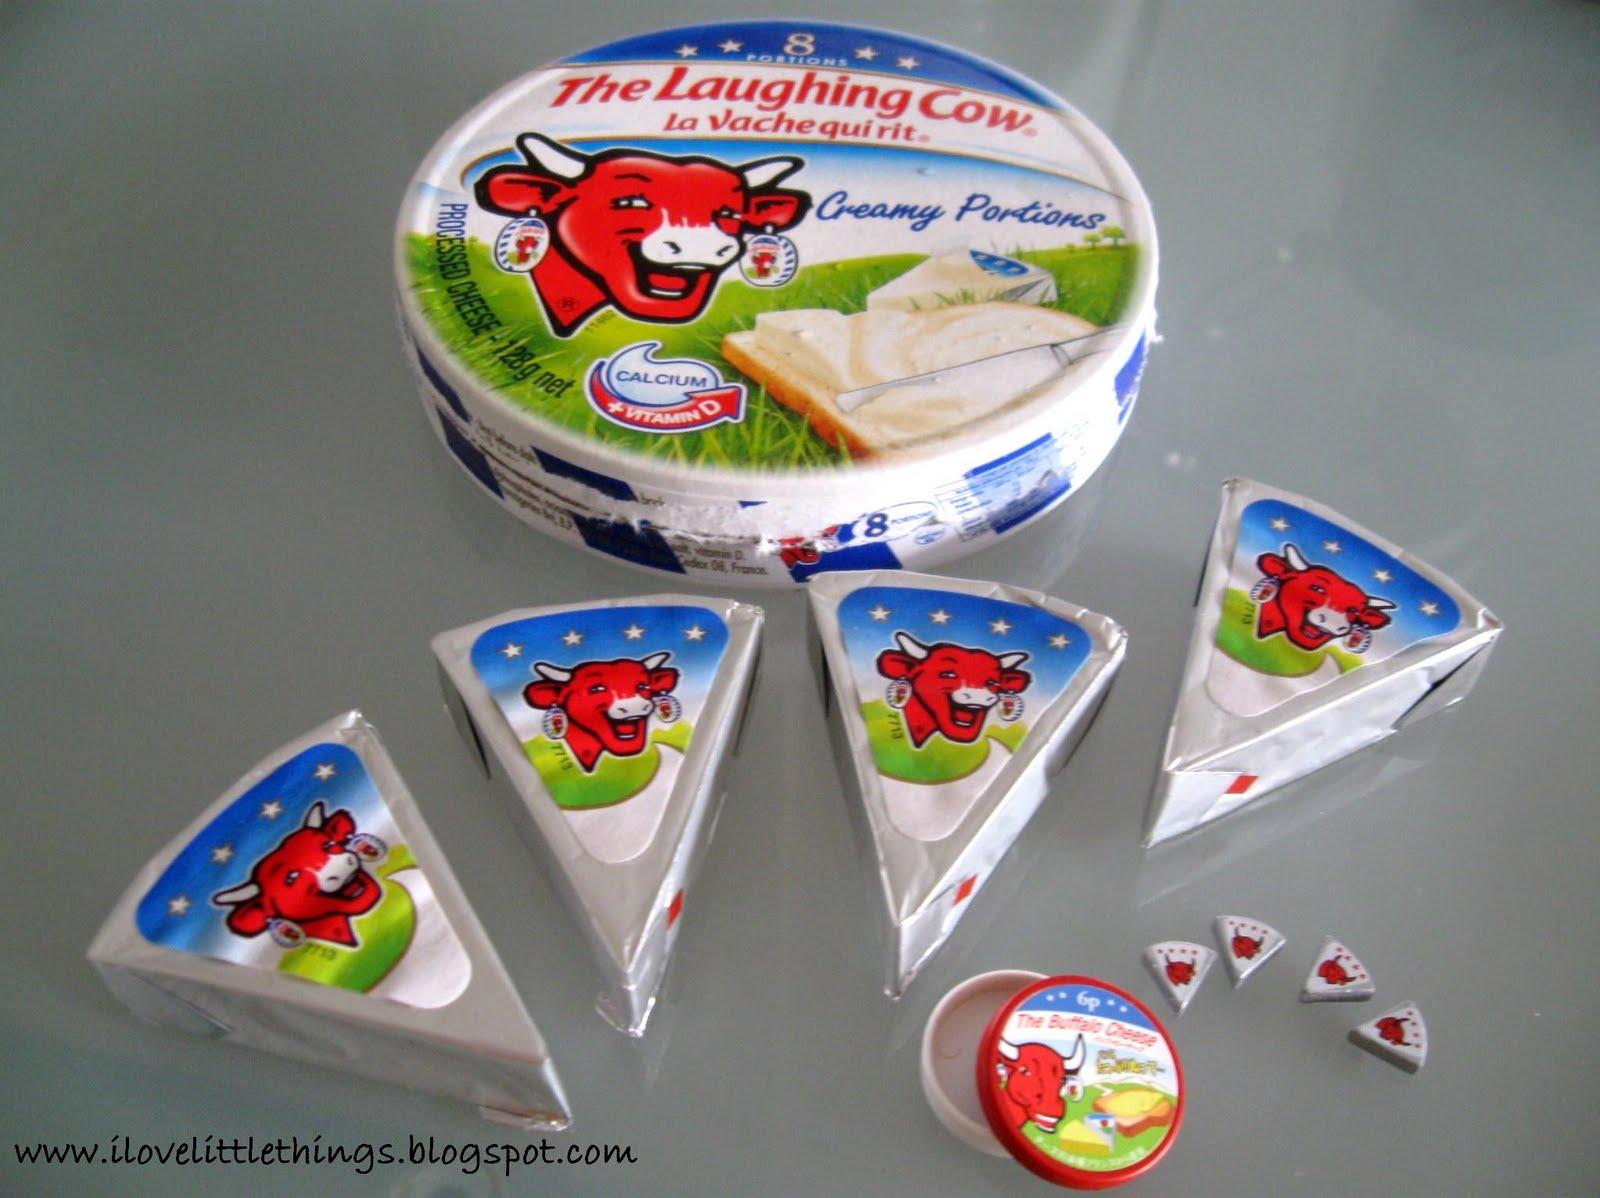 Cow Triangle Logo - Miniatures By I Love Little Things: Re Ment's Laughing Cow